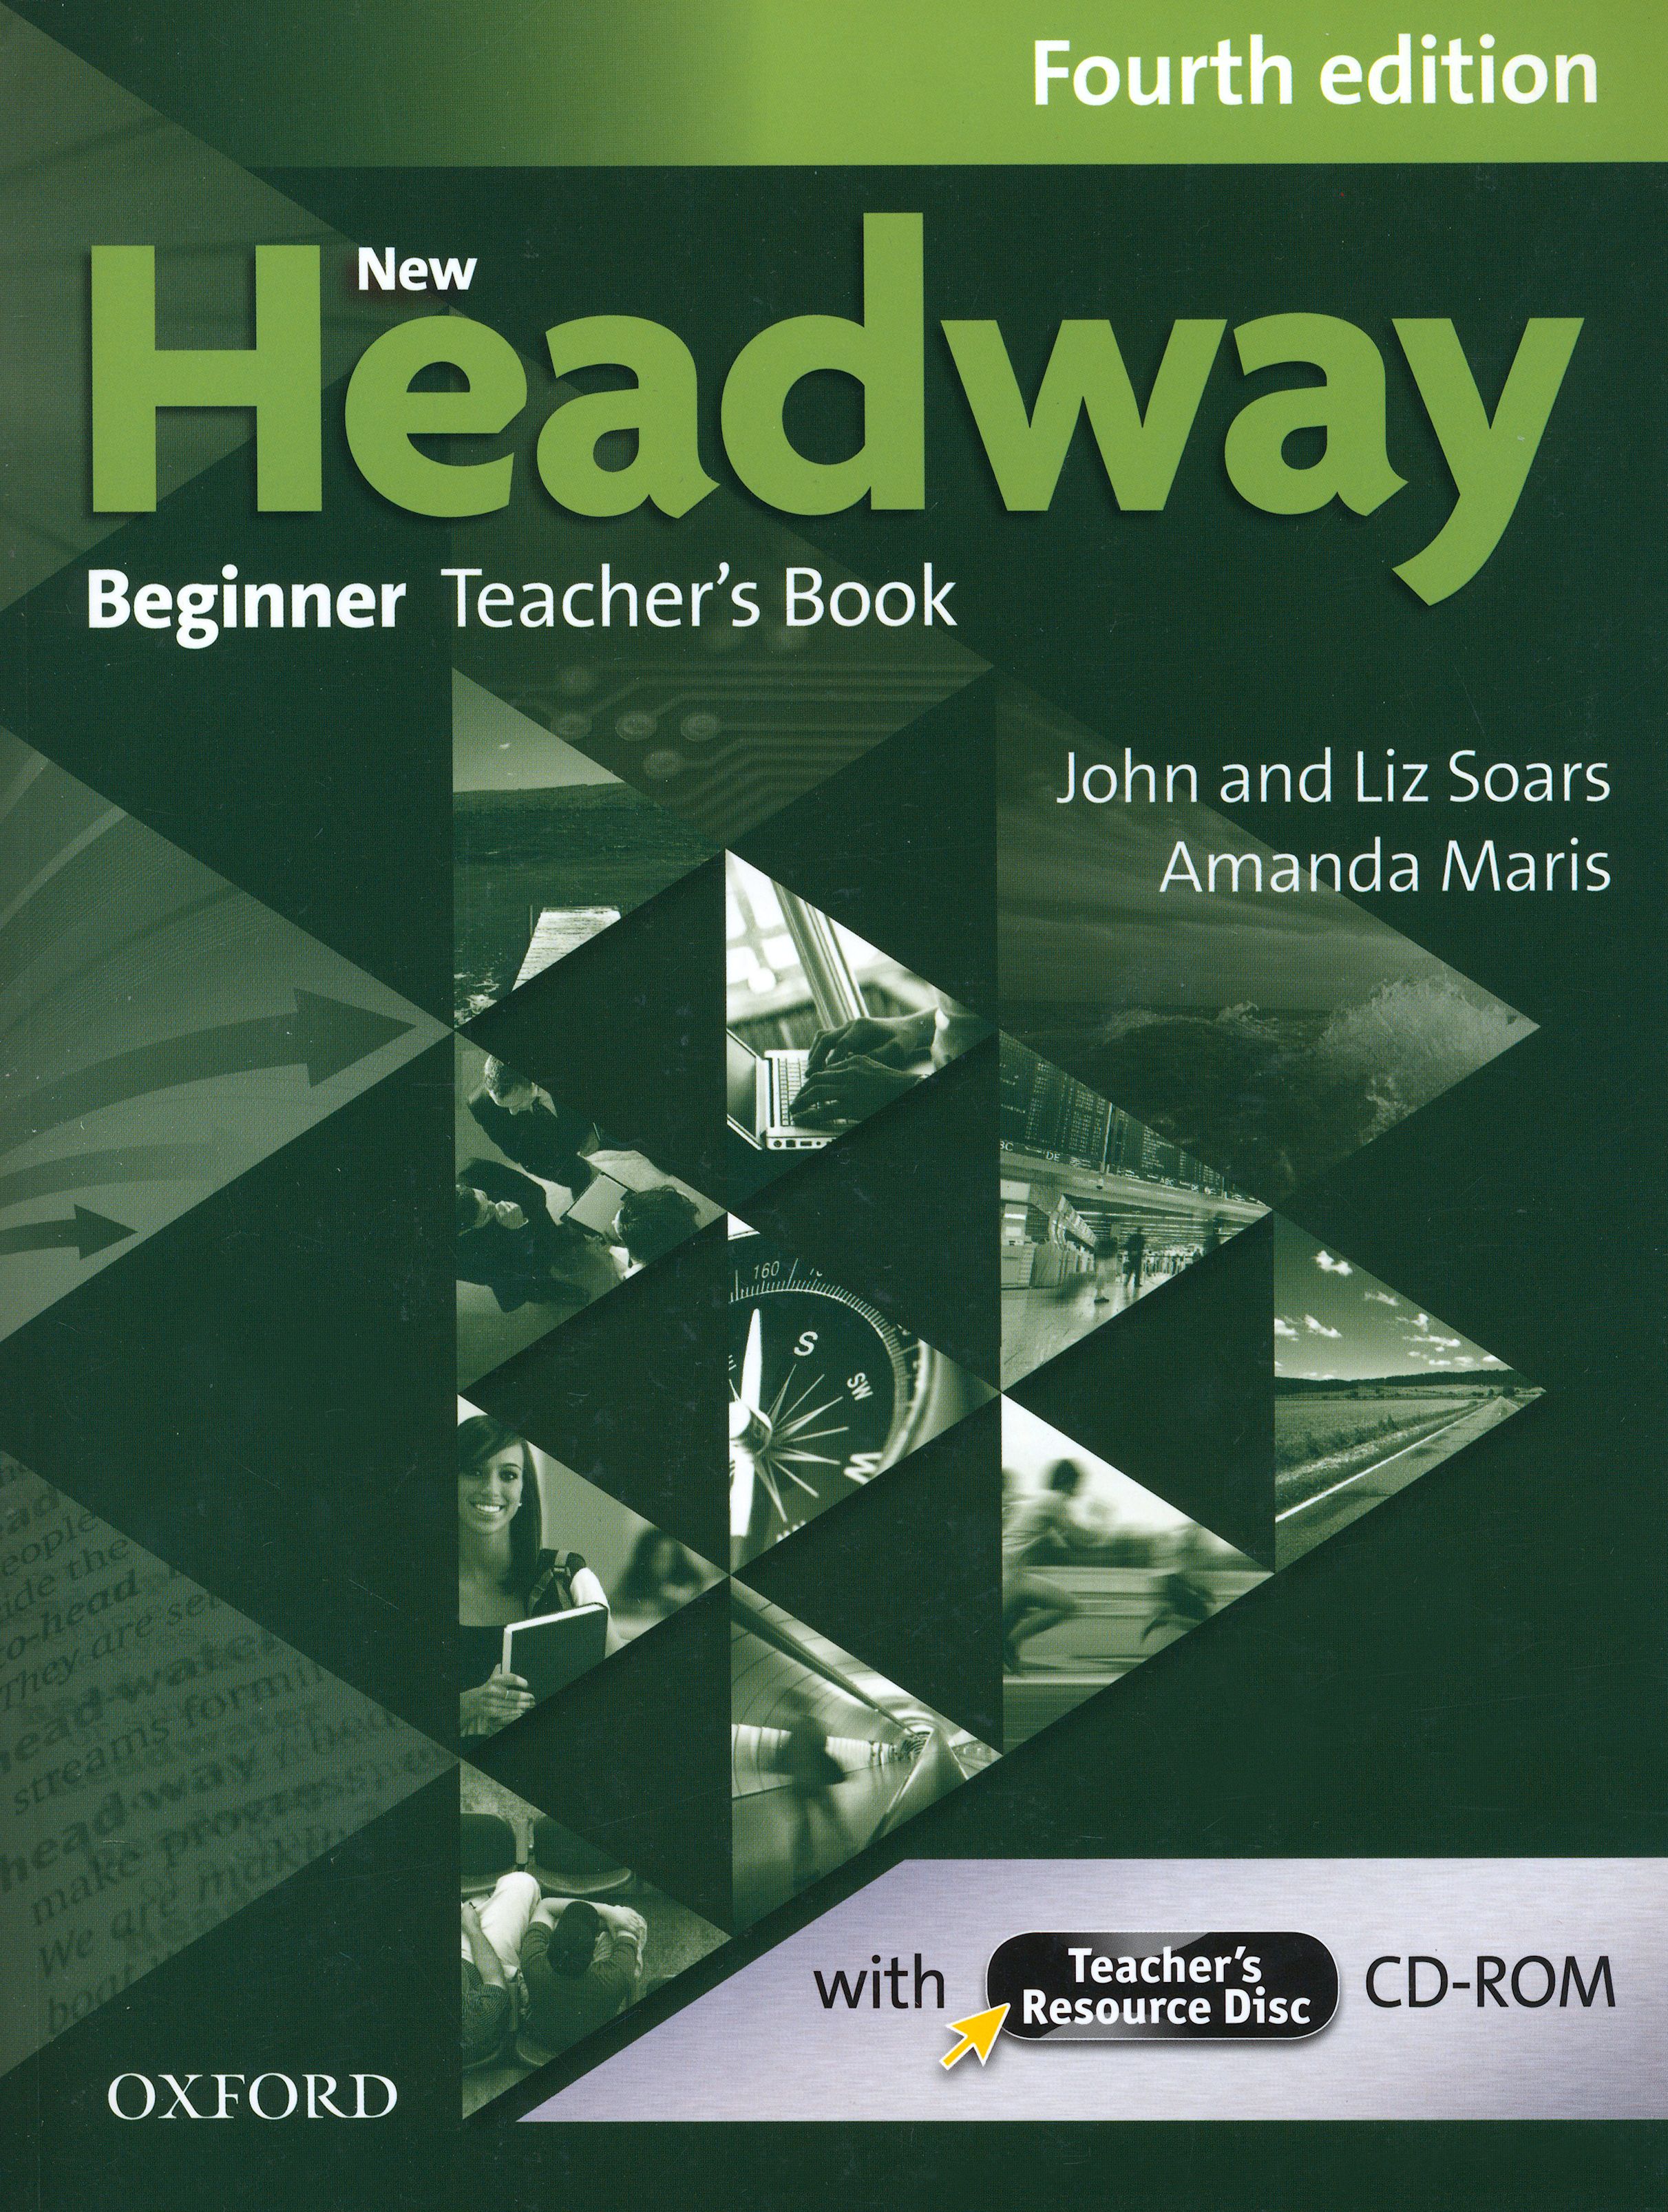 New Headway Beginner 4th Edition. New Headway 4 th. Headway Beginner 1 Edition. Headway Beginner 4-Edition.